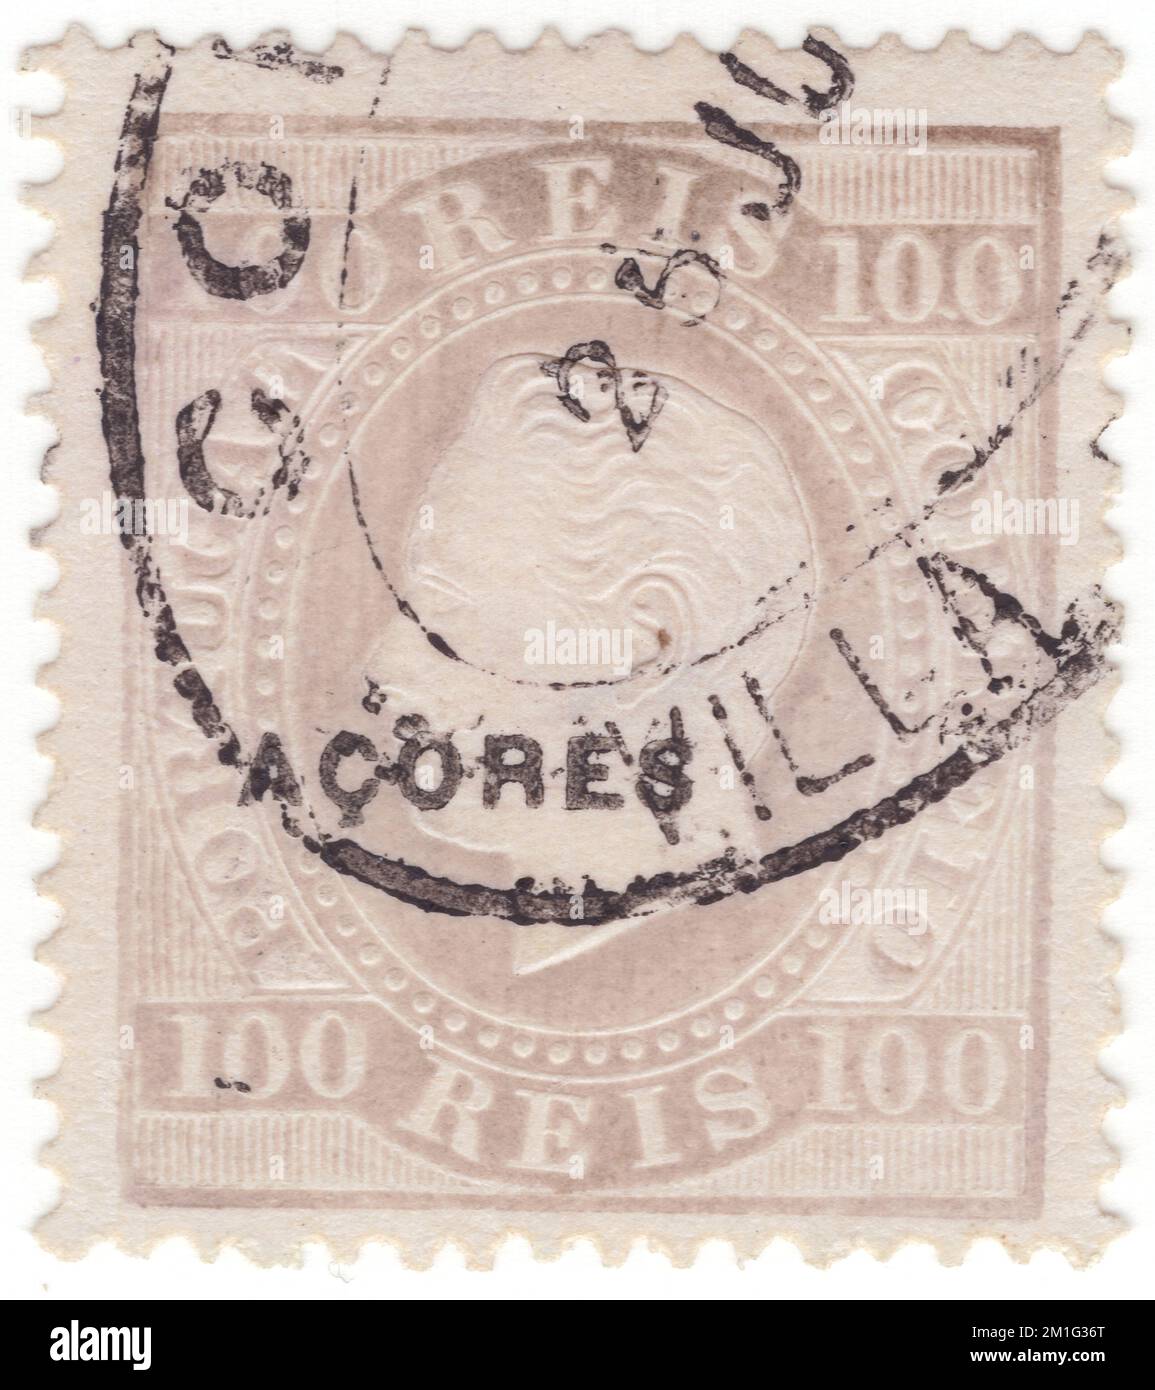 AZORES - 1882: An 100 reis lilac postage stamp depicting portrait of King Luiz (Dom Luís I). Stamps of Portugal overprinted in black 'ACORES'. Dom Luís I (31 October 1838, in Lisbon – 19 October 1889, in Cascais), known as The Popular was a member of the ruling House of Braganza, and King of Portugal from 1861 to 1889. The second son of Queen Maria II and her consort, King Ferdinand, he acceded to the throne upon the death of his elder brother King Pedro V. Luís was a cultured man who wrote vernacular poetry, but had no distinguishing gifts in the politics Stock Photo